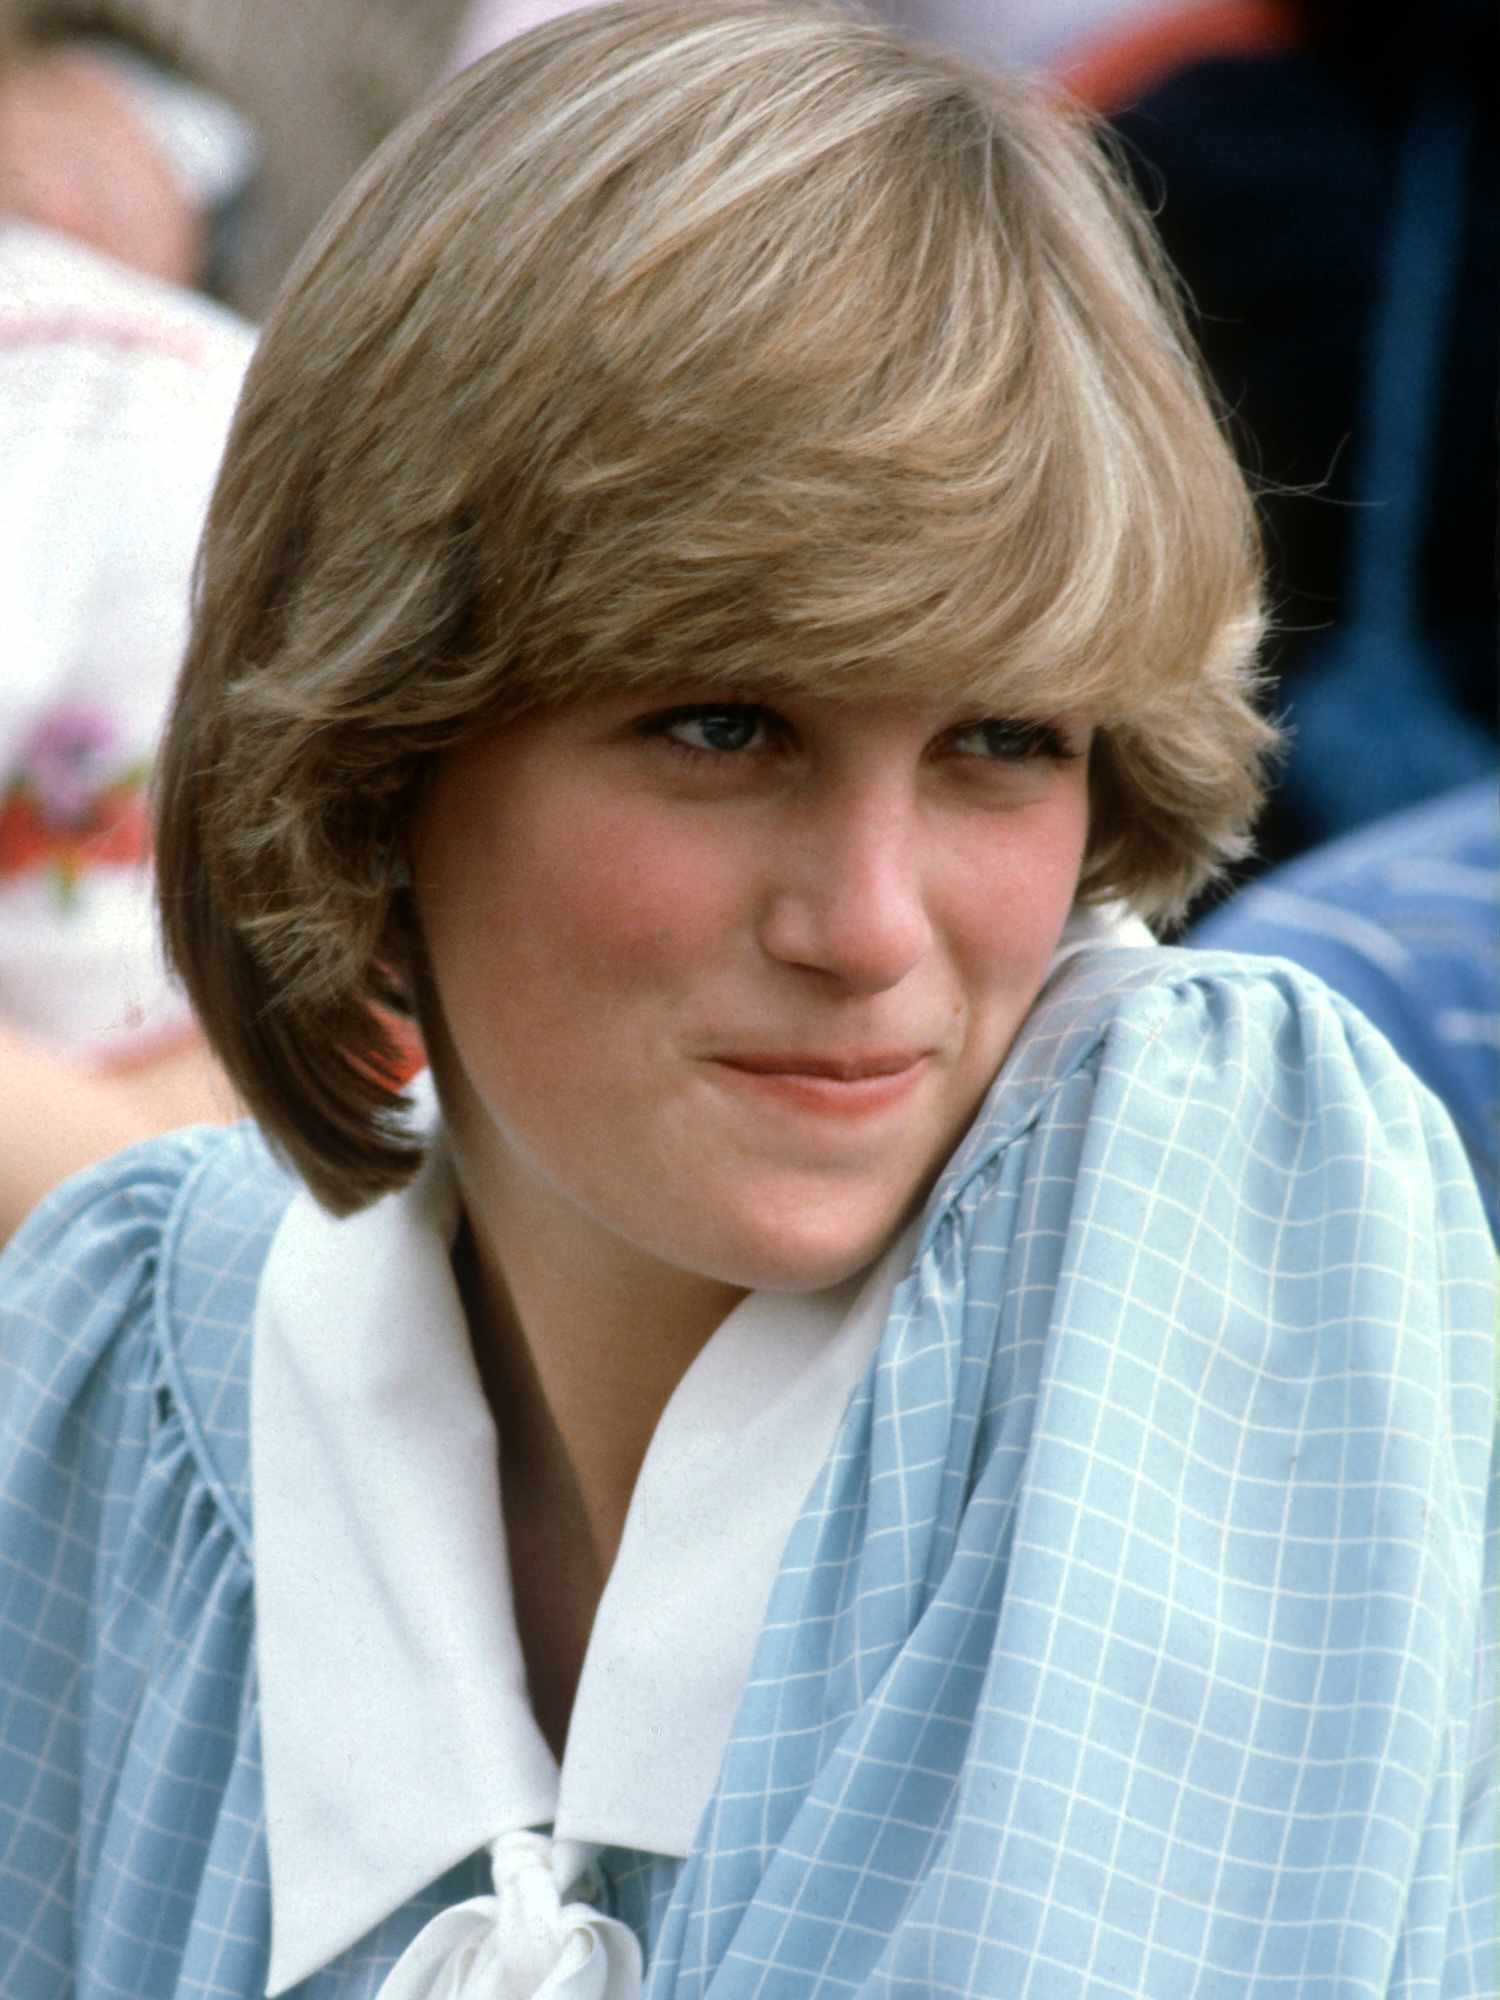 Princess Diana wears a bob haircut with bangs and a blue-green patterned dress with a white collar